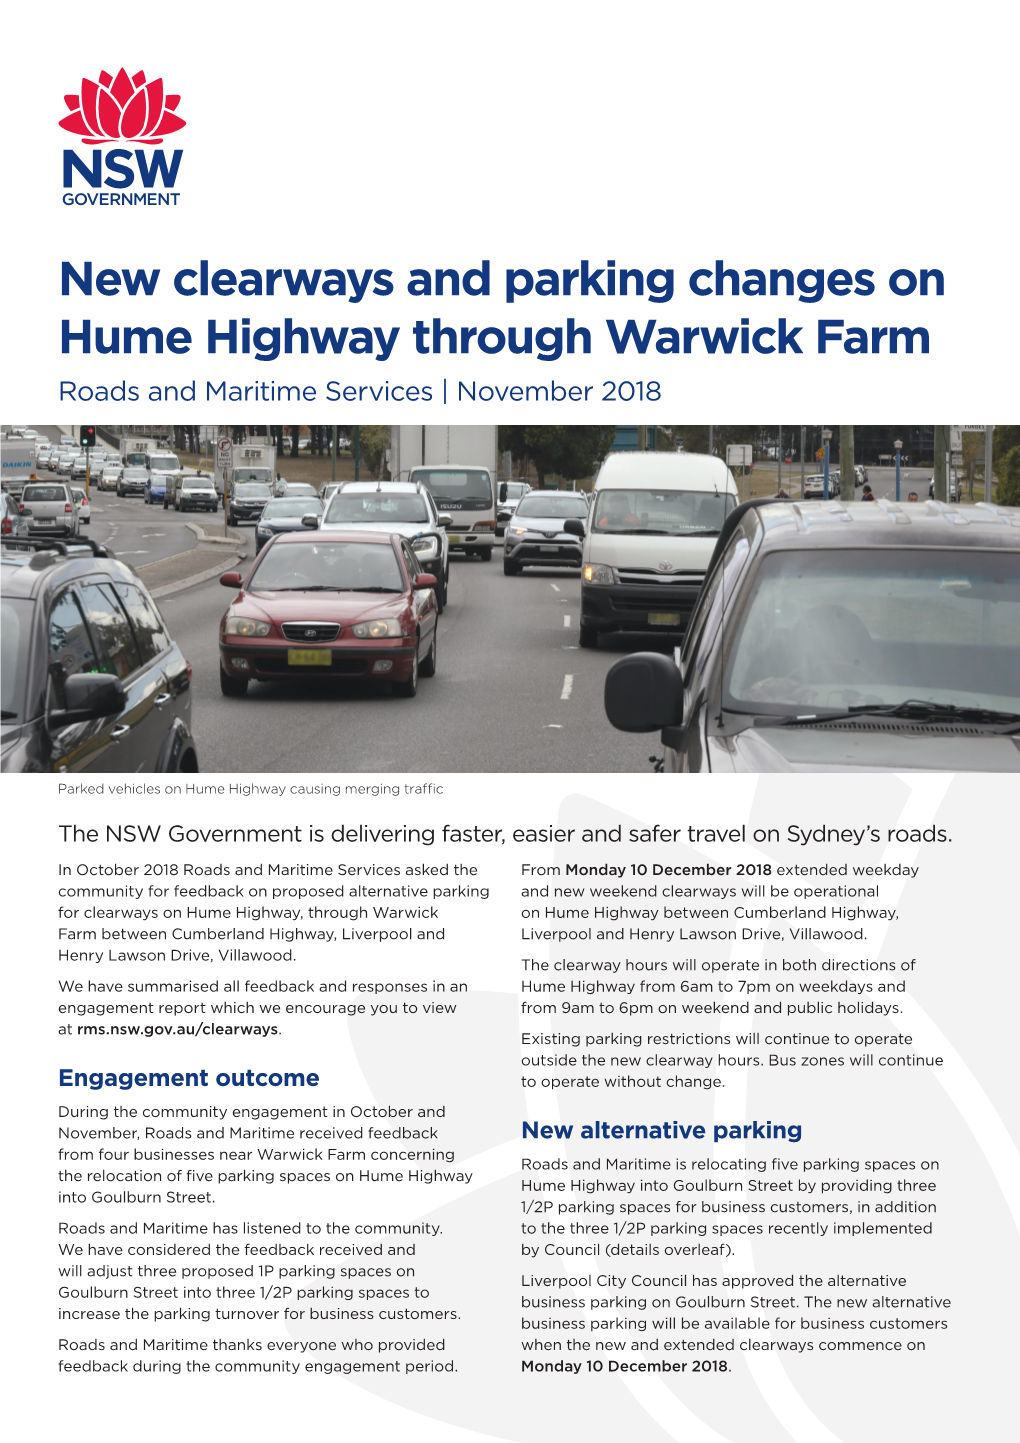 New Clearways and Parking Changes on Hume Highway Through Warwick